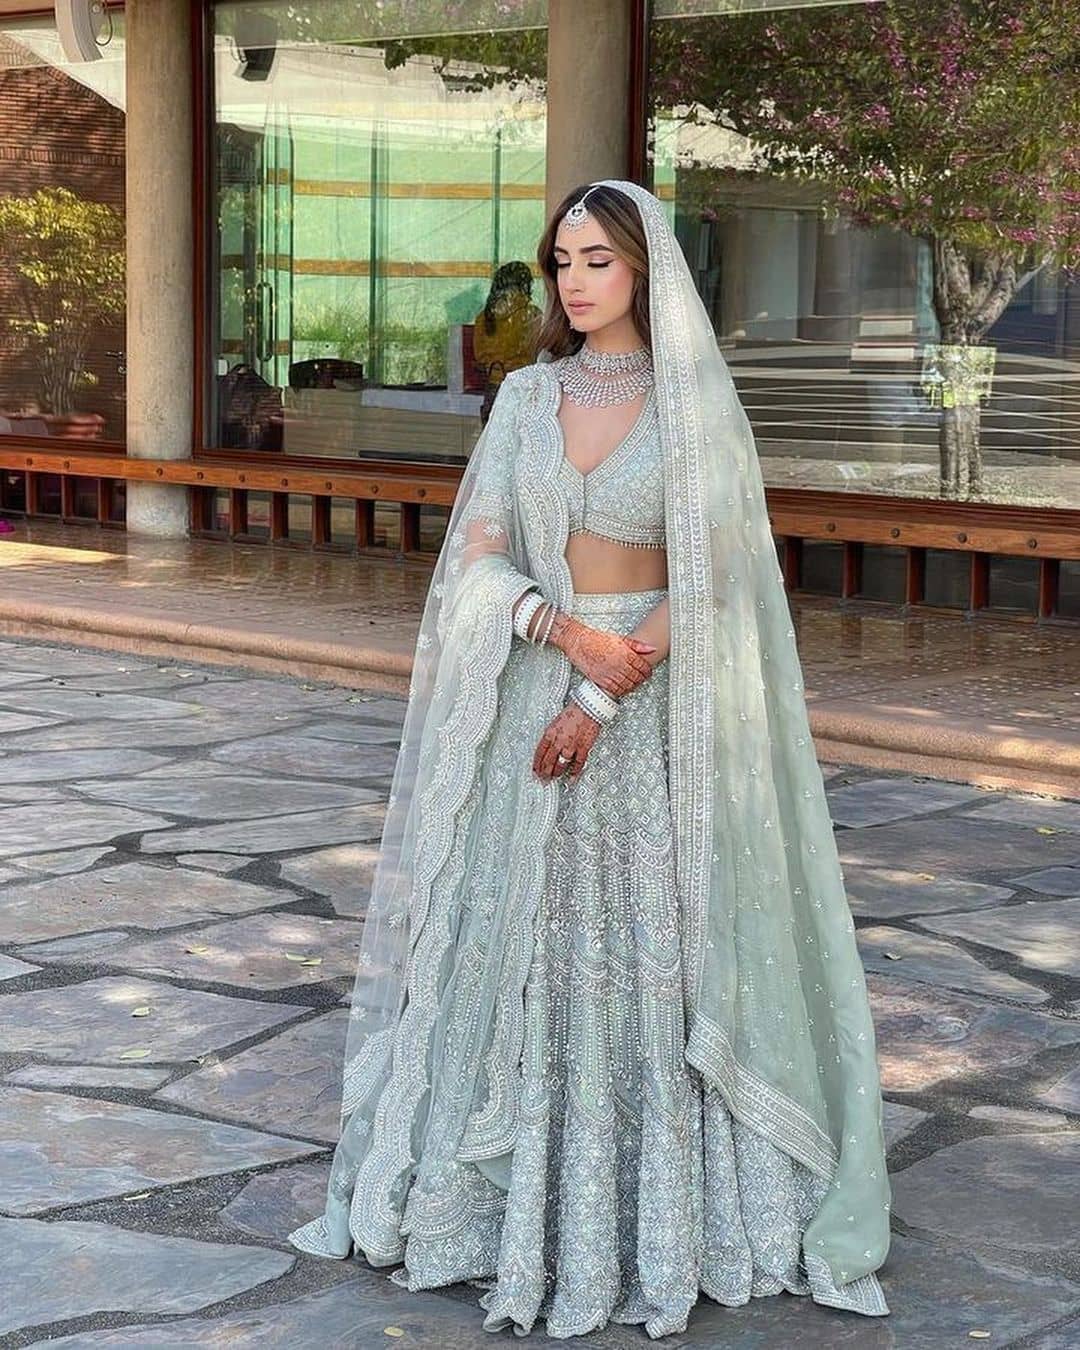 More Silver Lehengas for the Summer Reception